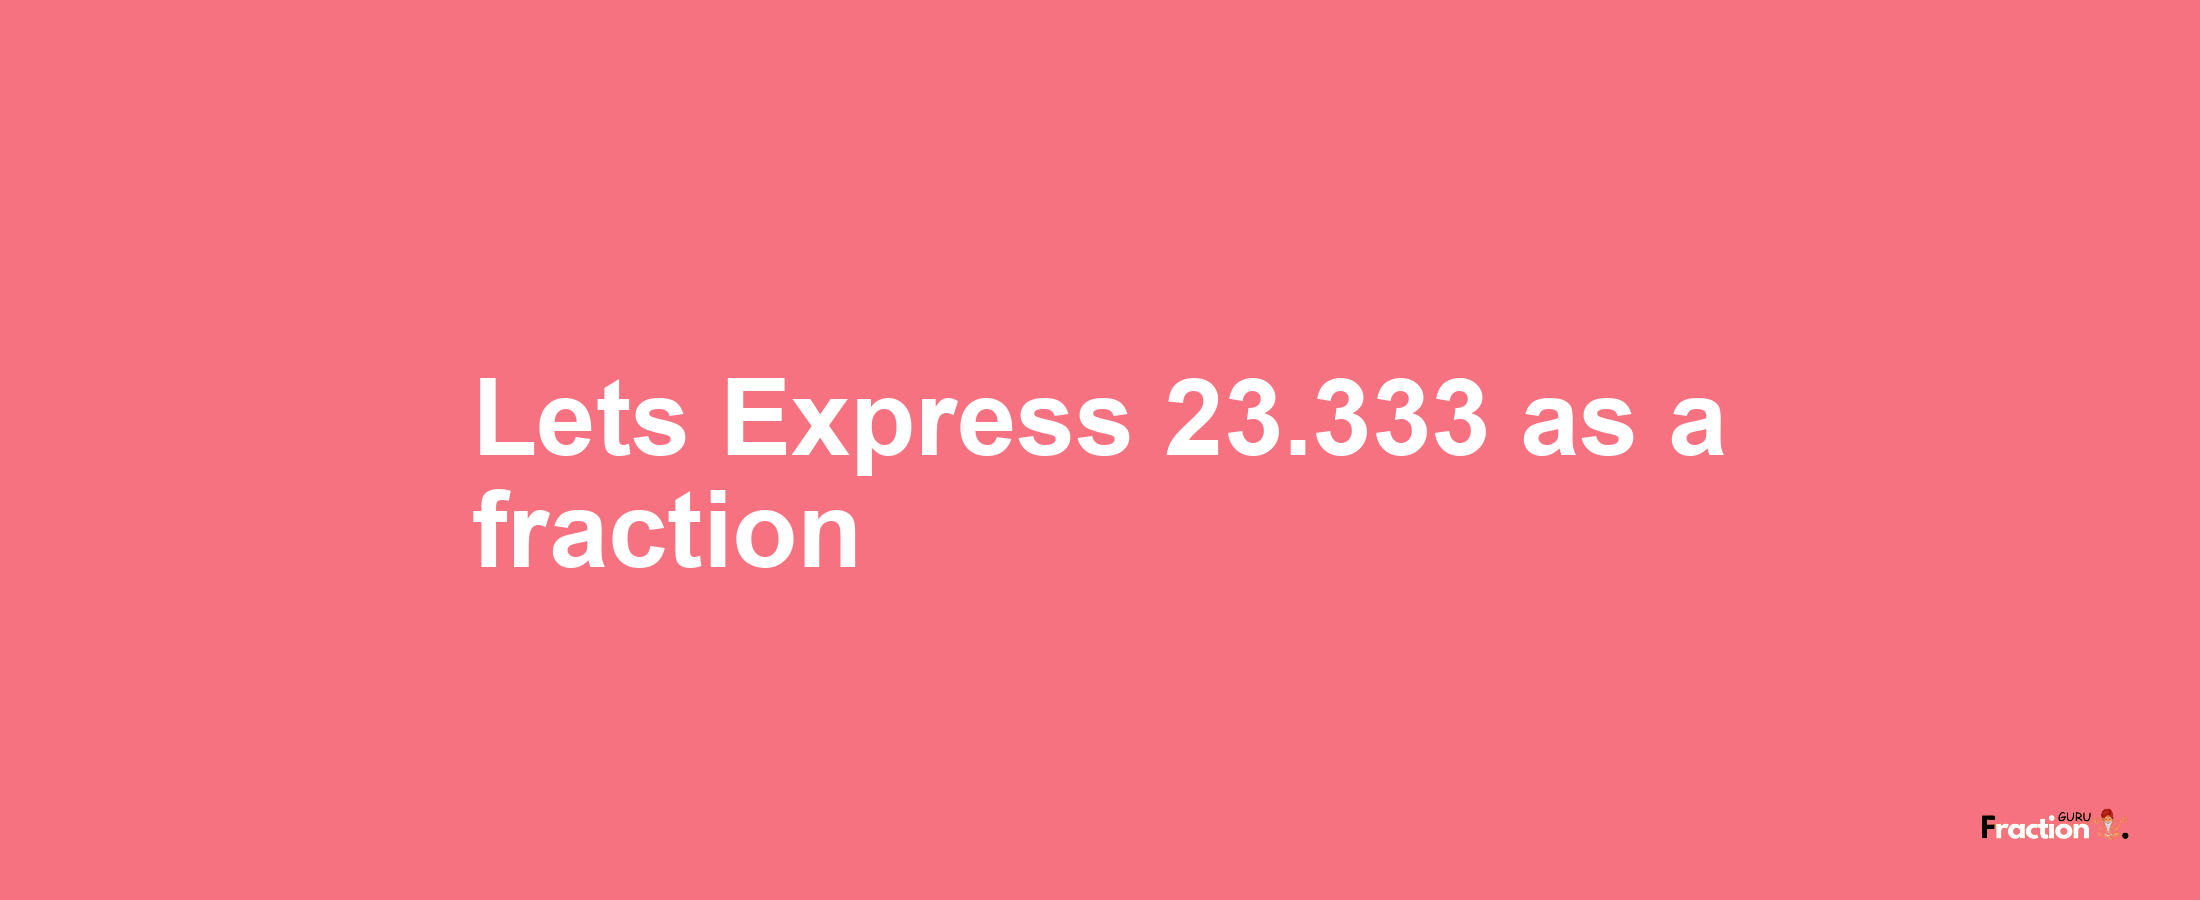 Lets Express 23.333 as afraction